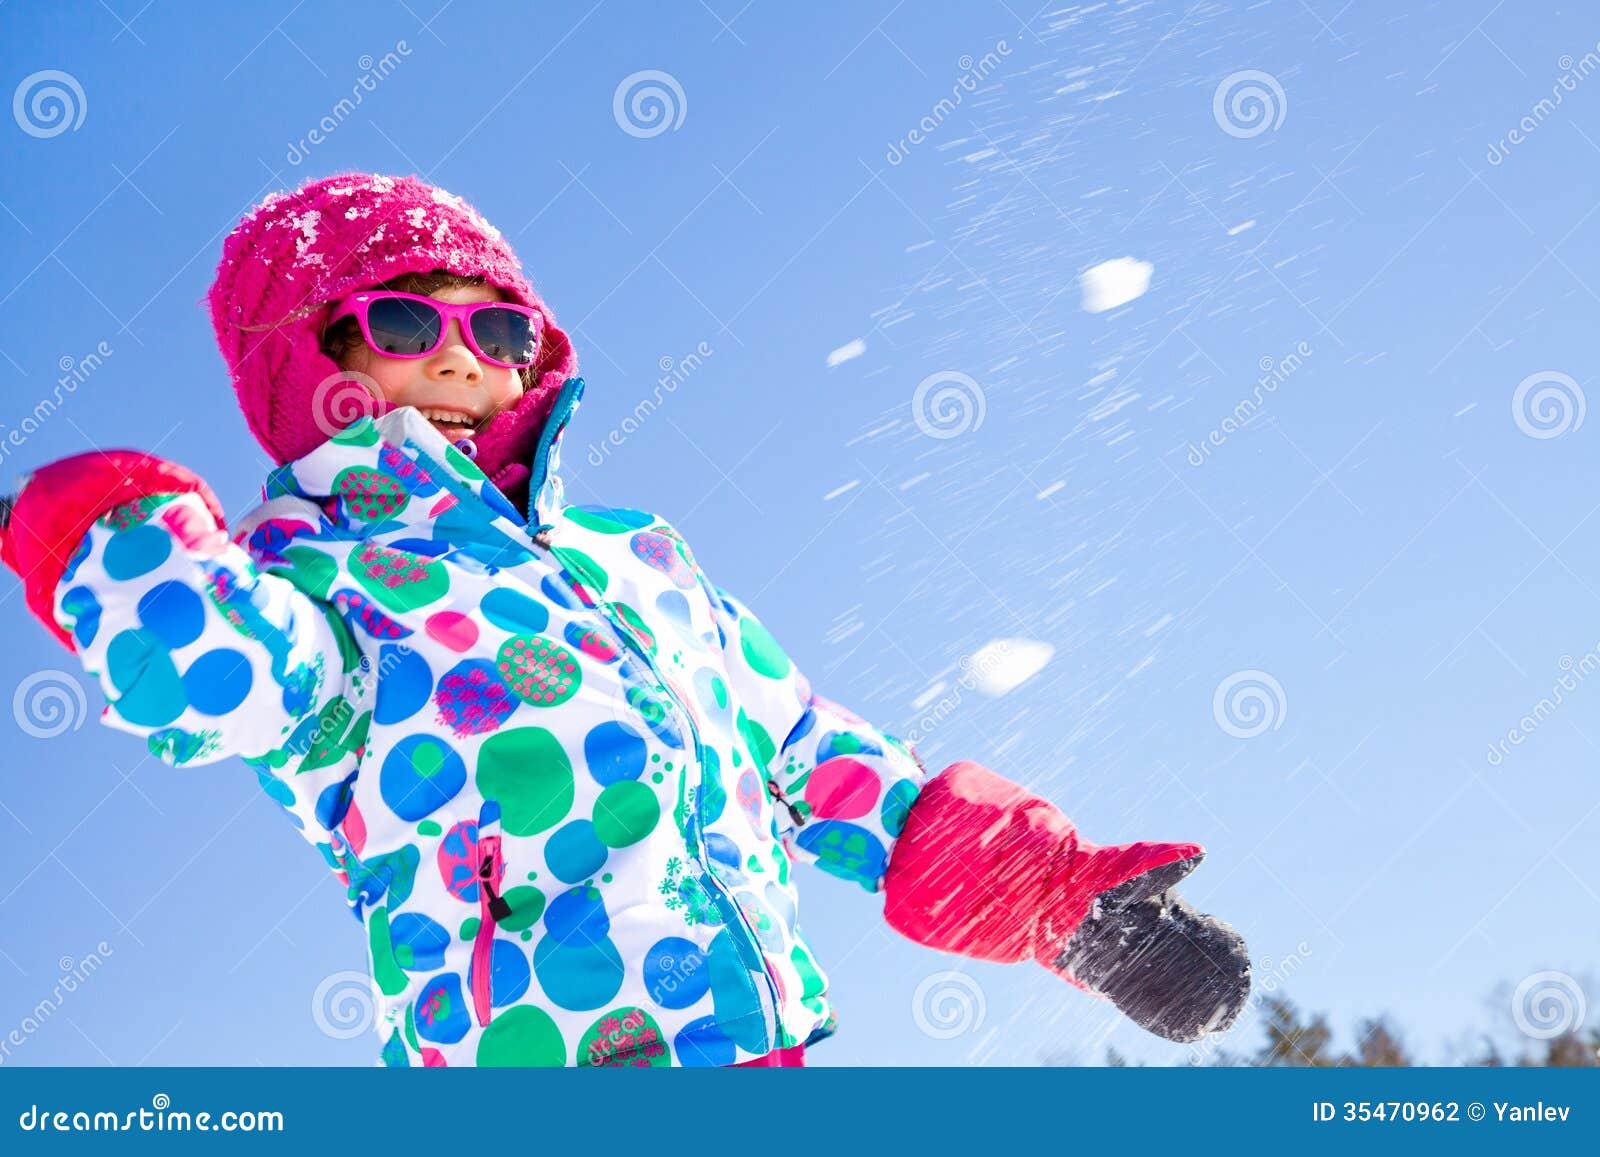 Winter playing. Little girl playing in snowballs in wintertime